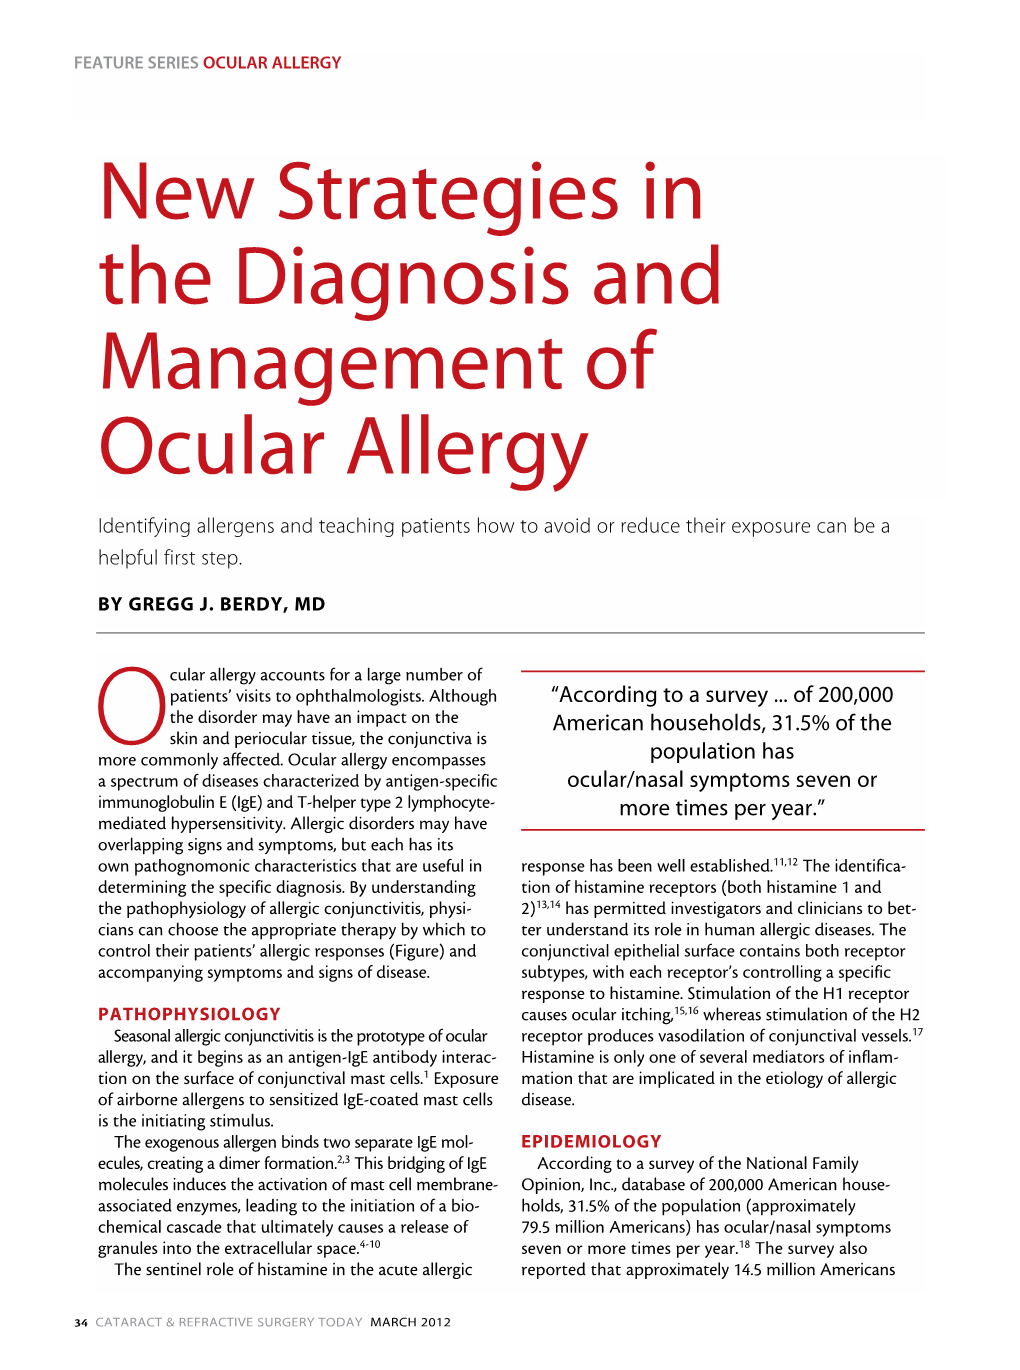 New Strategies in the Diagnosis and Management of Ocular Allergy